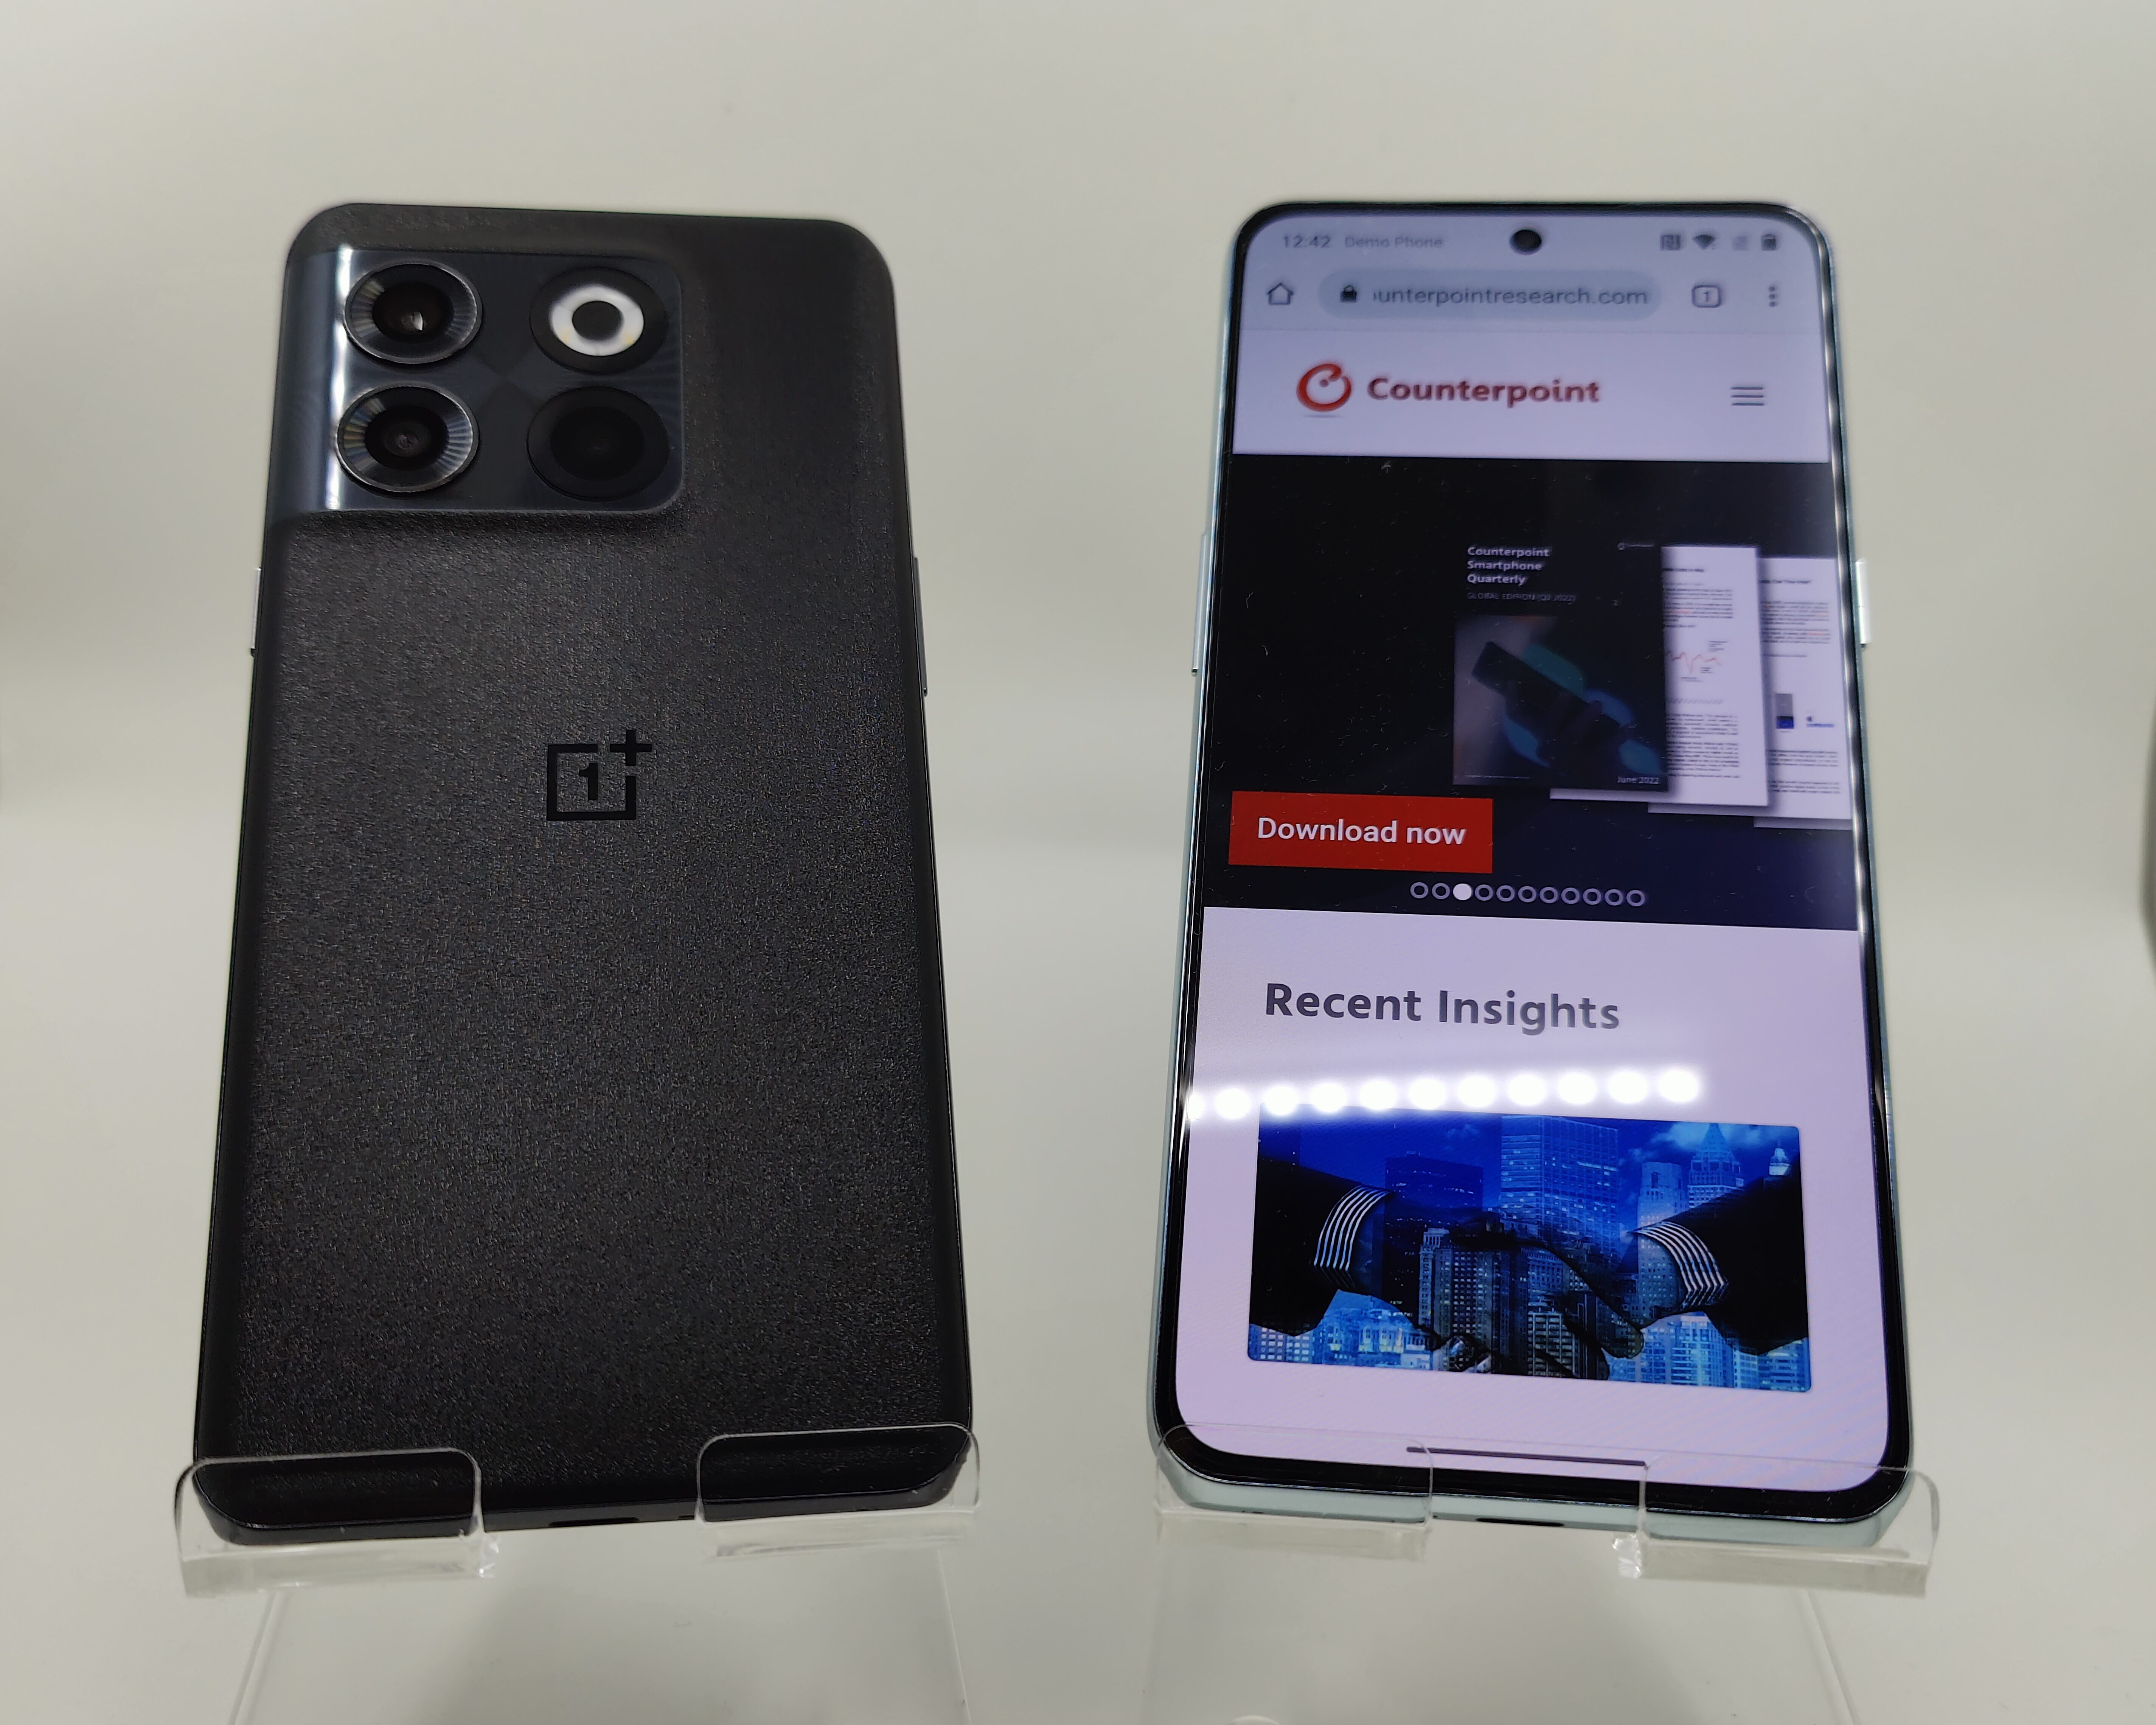 OnePlus 10T and Counterpoint Logo